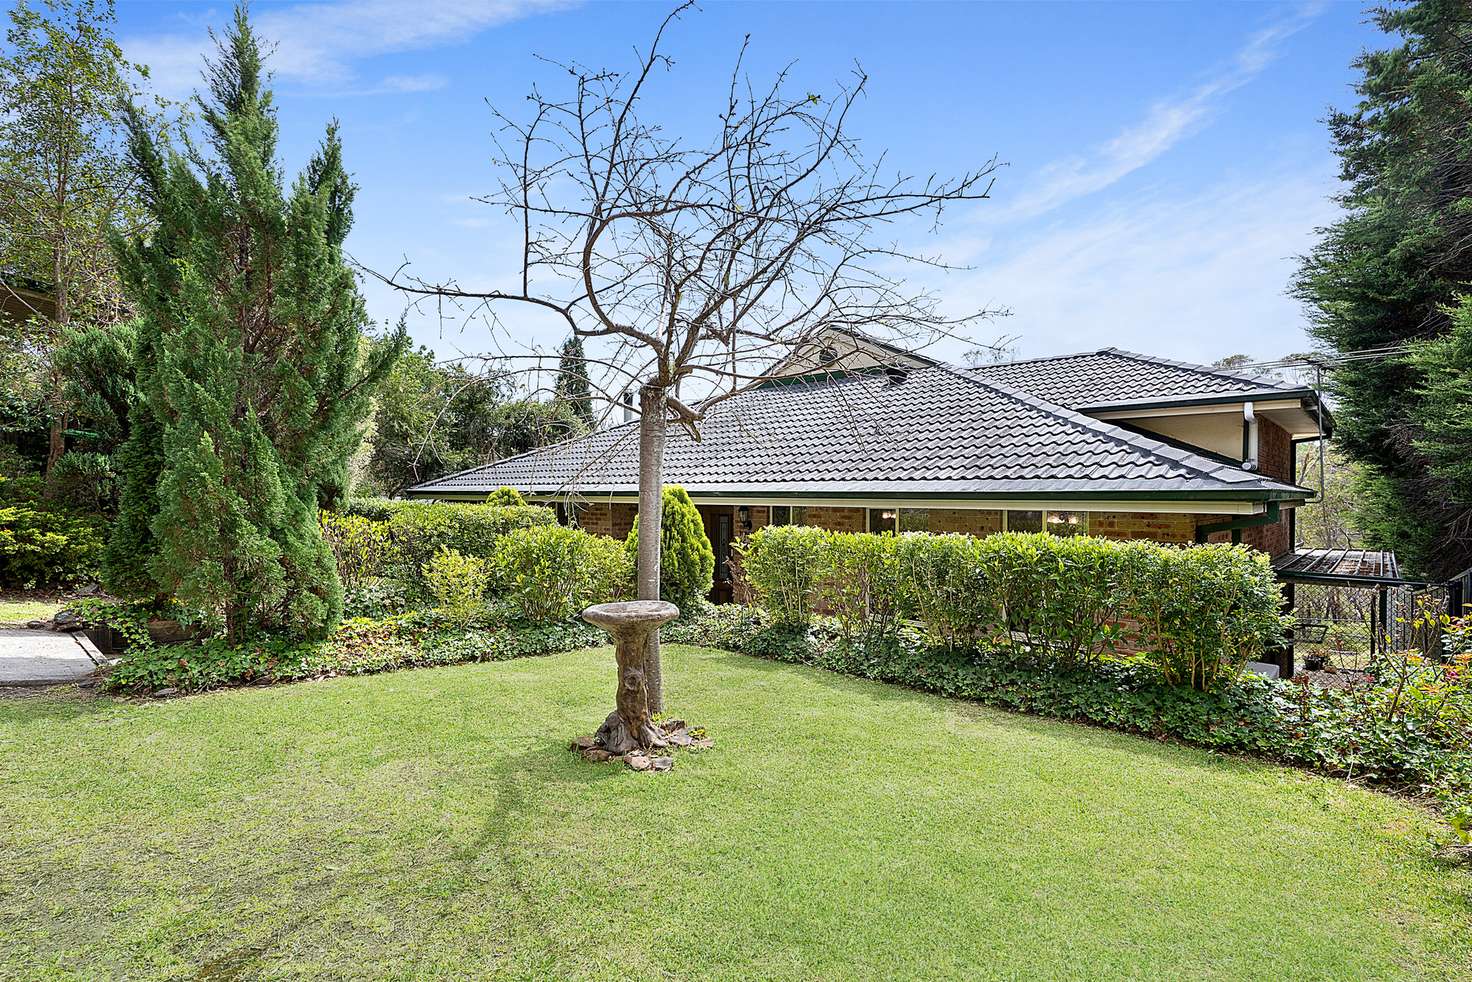 Main view of Homely house listing, 59 Pimelea Drive, Woodford NSW 2778